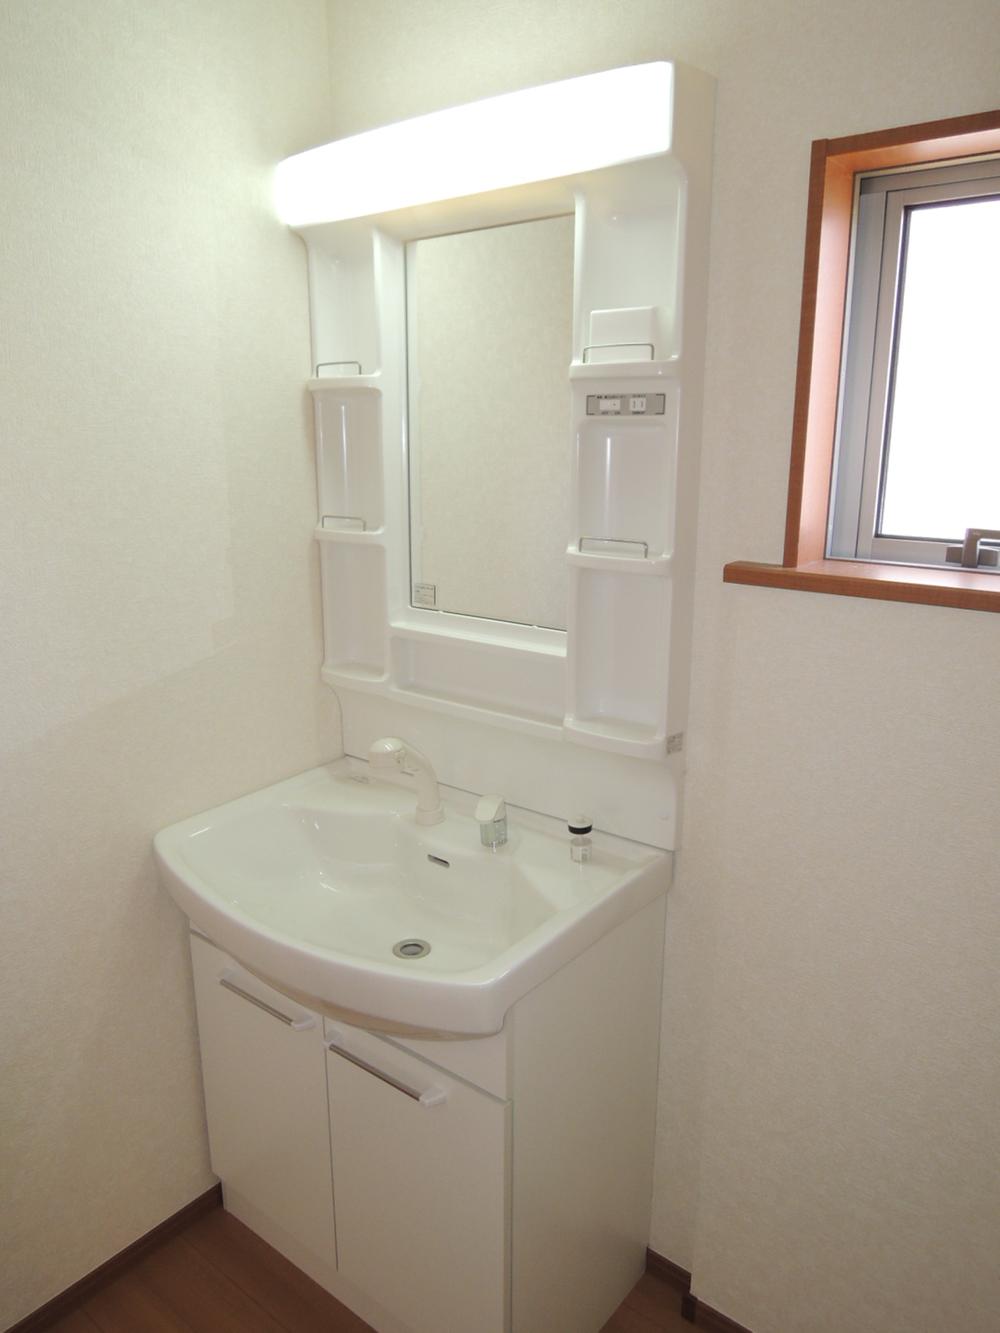 Same specifications photos (Other introspection). Washbasin with shower (same specifications)